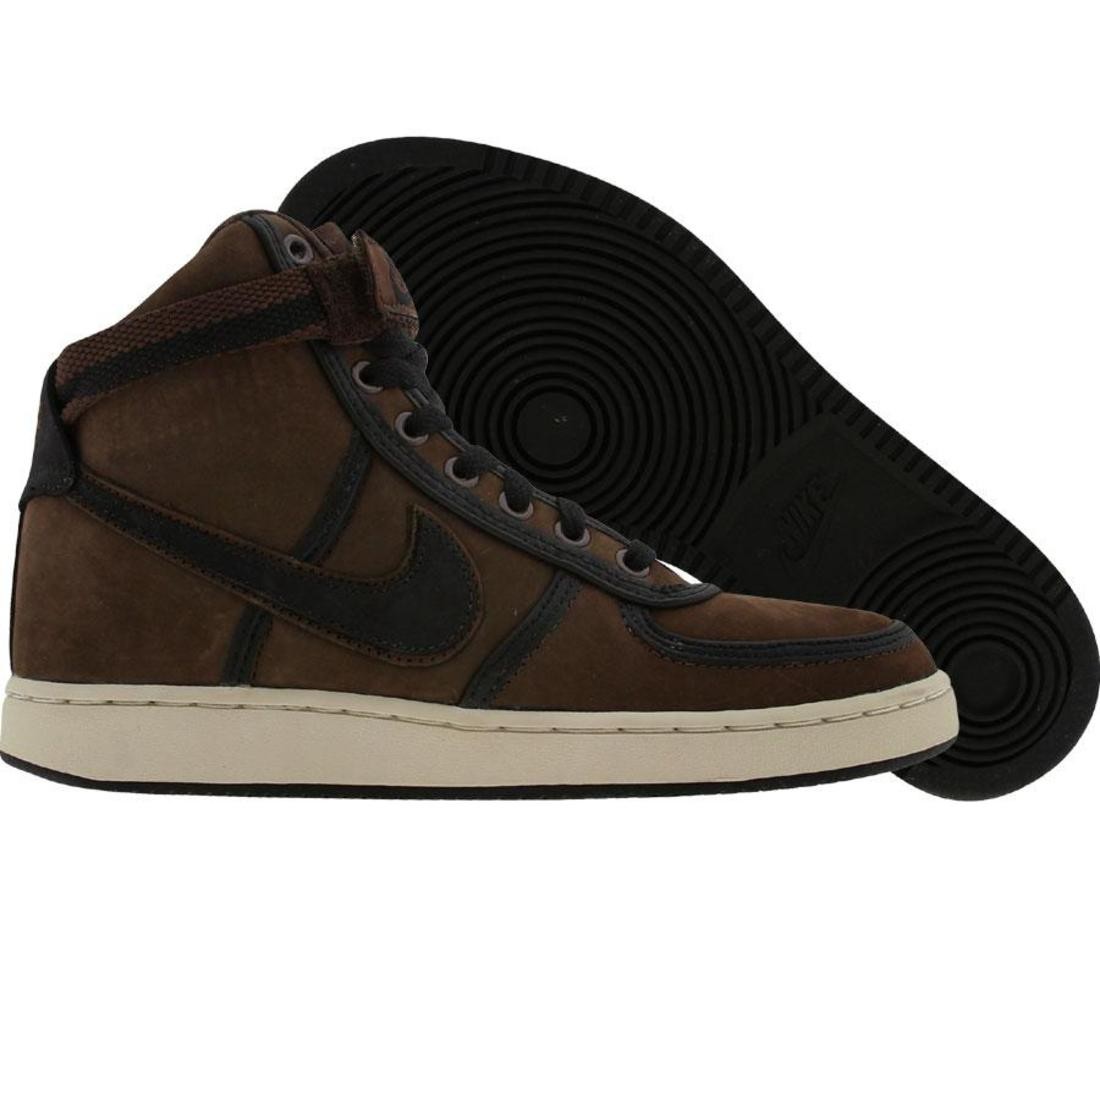 Nike Vandal High WP (Water Proof Edition)